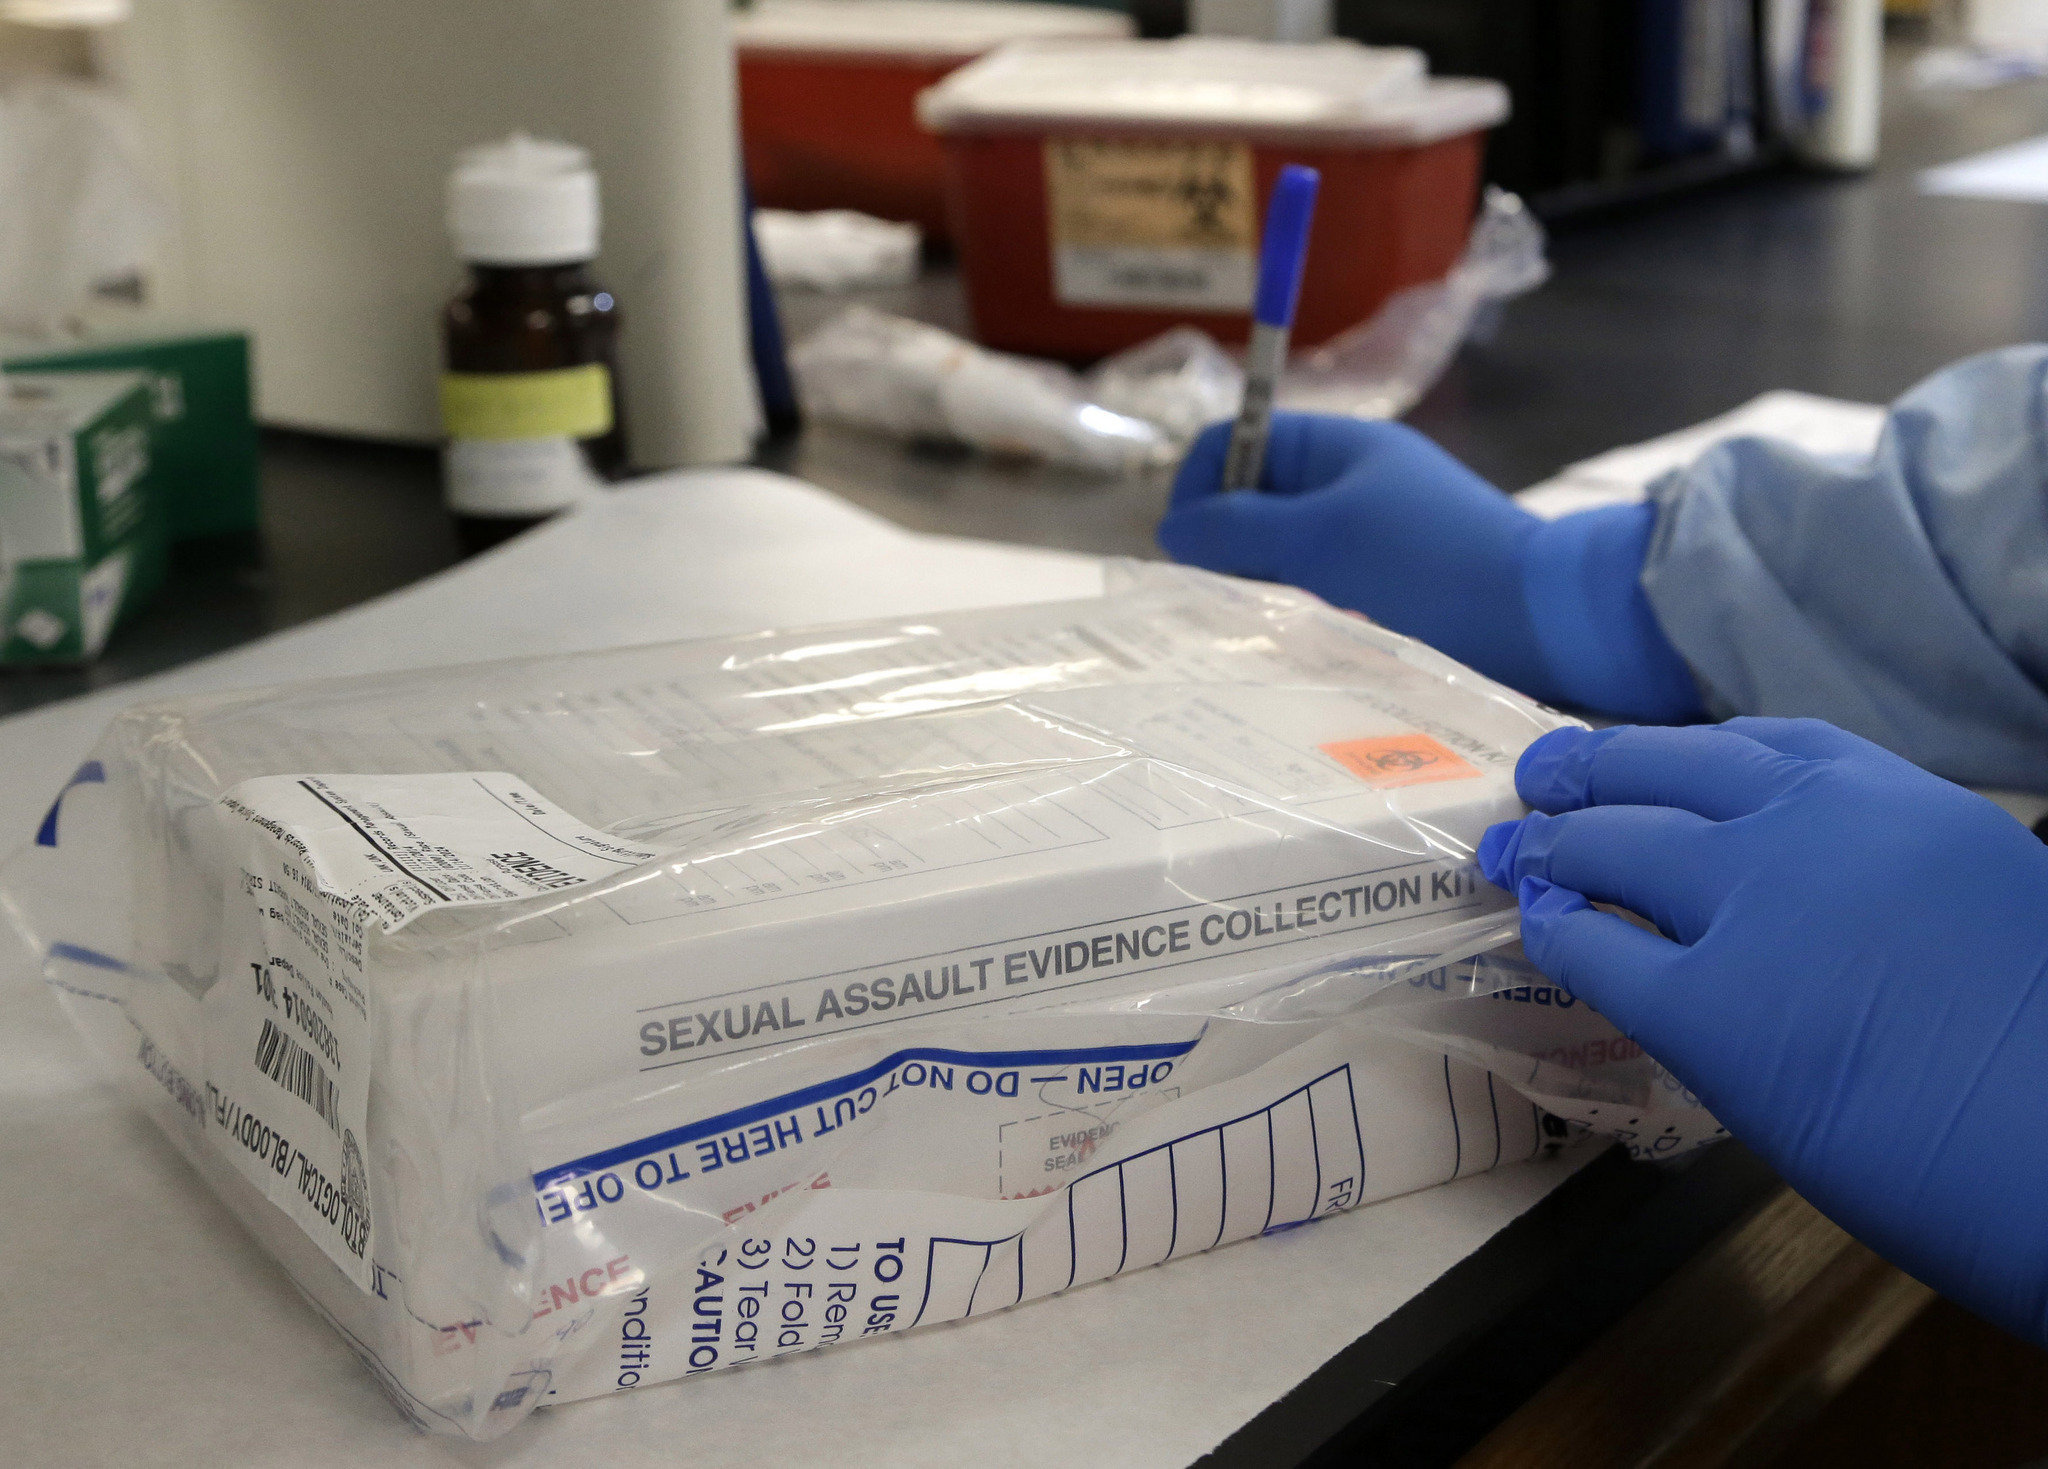 Detroit rape kit problem continued for years after initial discovery